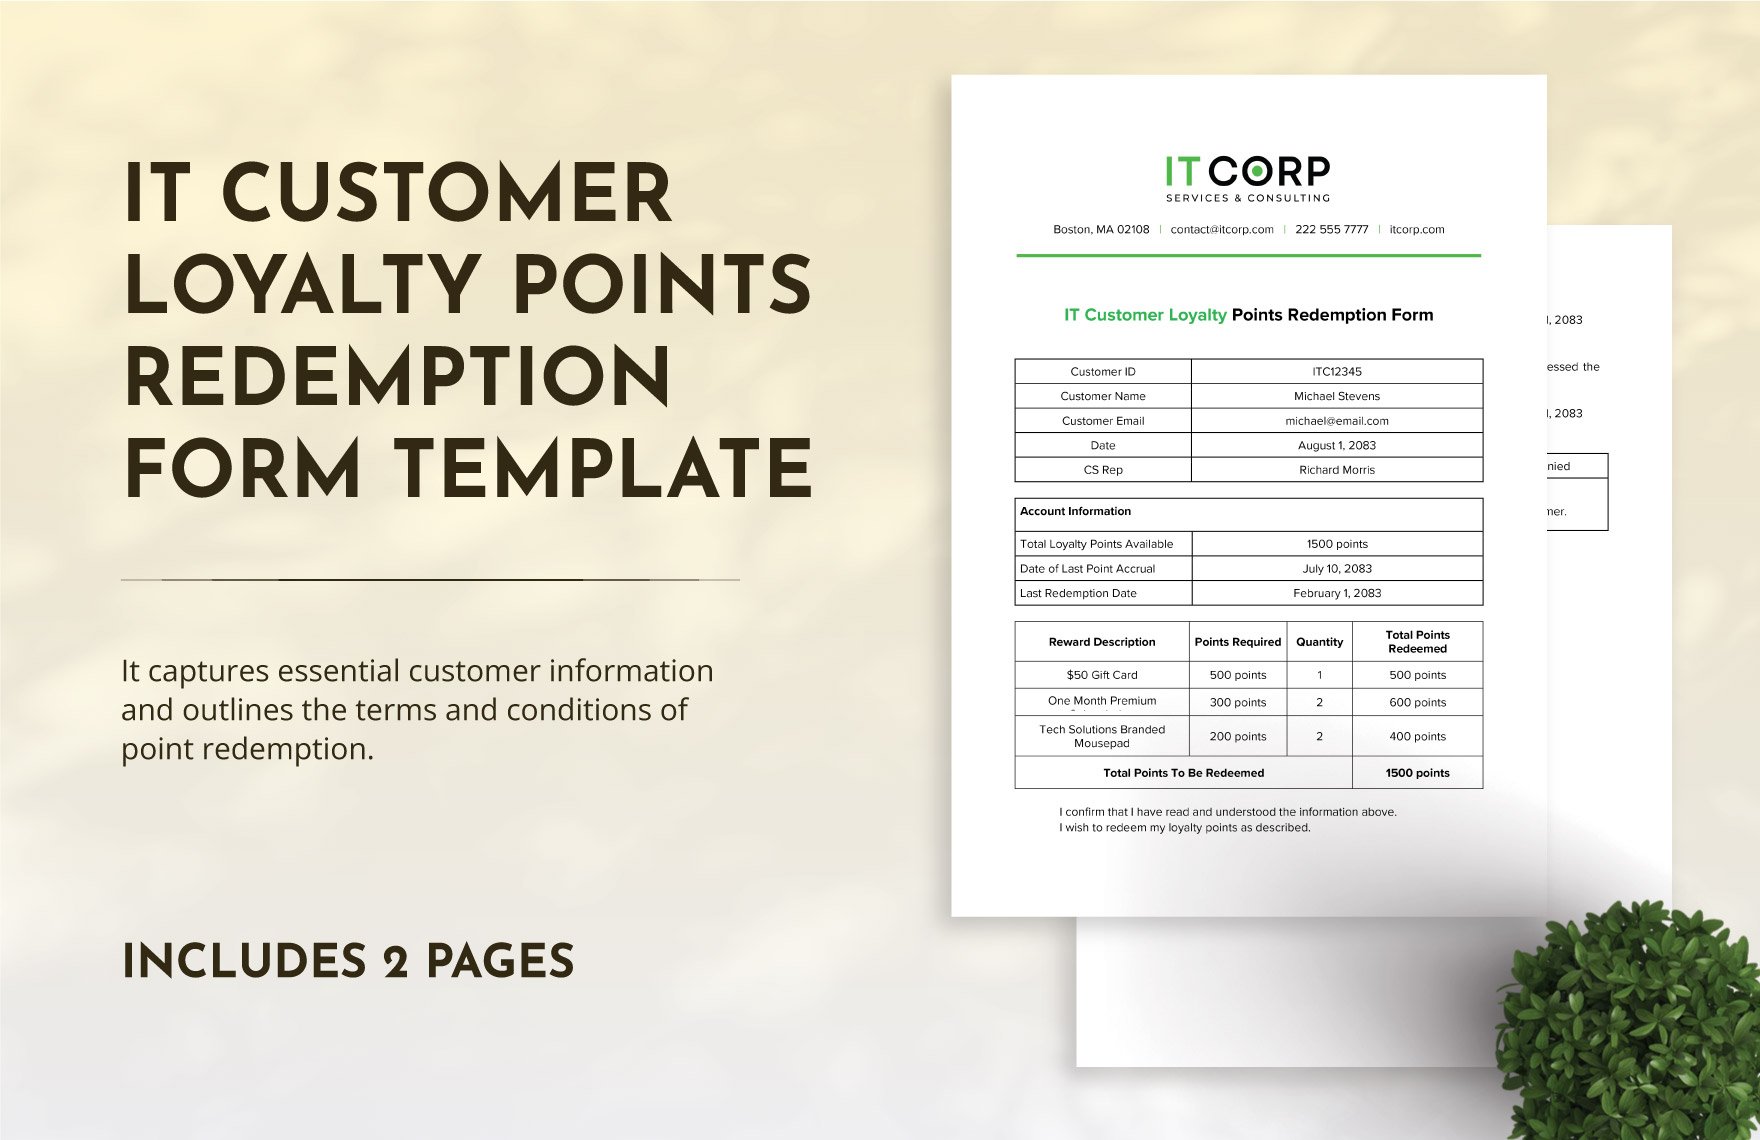 IT Customer Loyalty Points Redemption Form Template